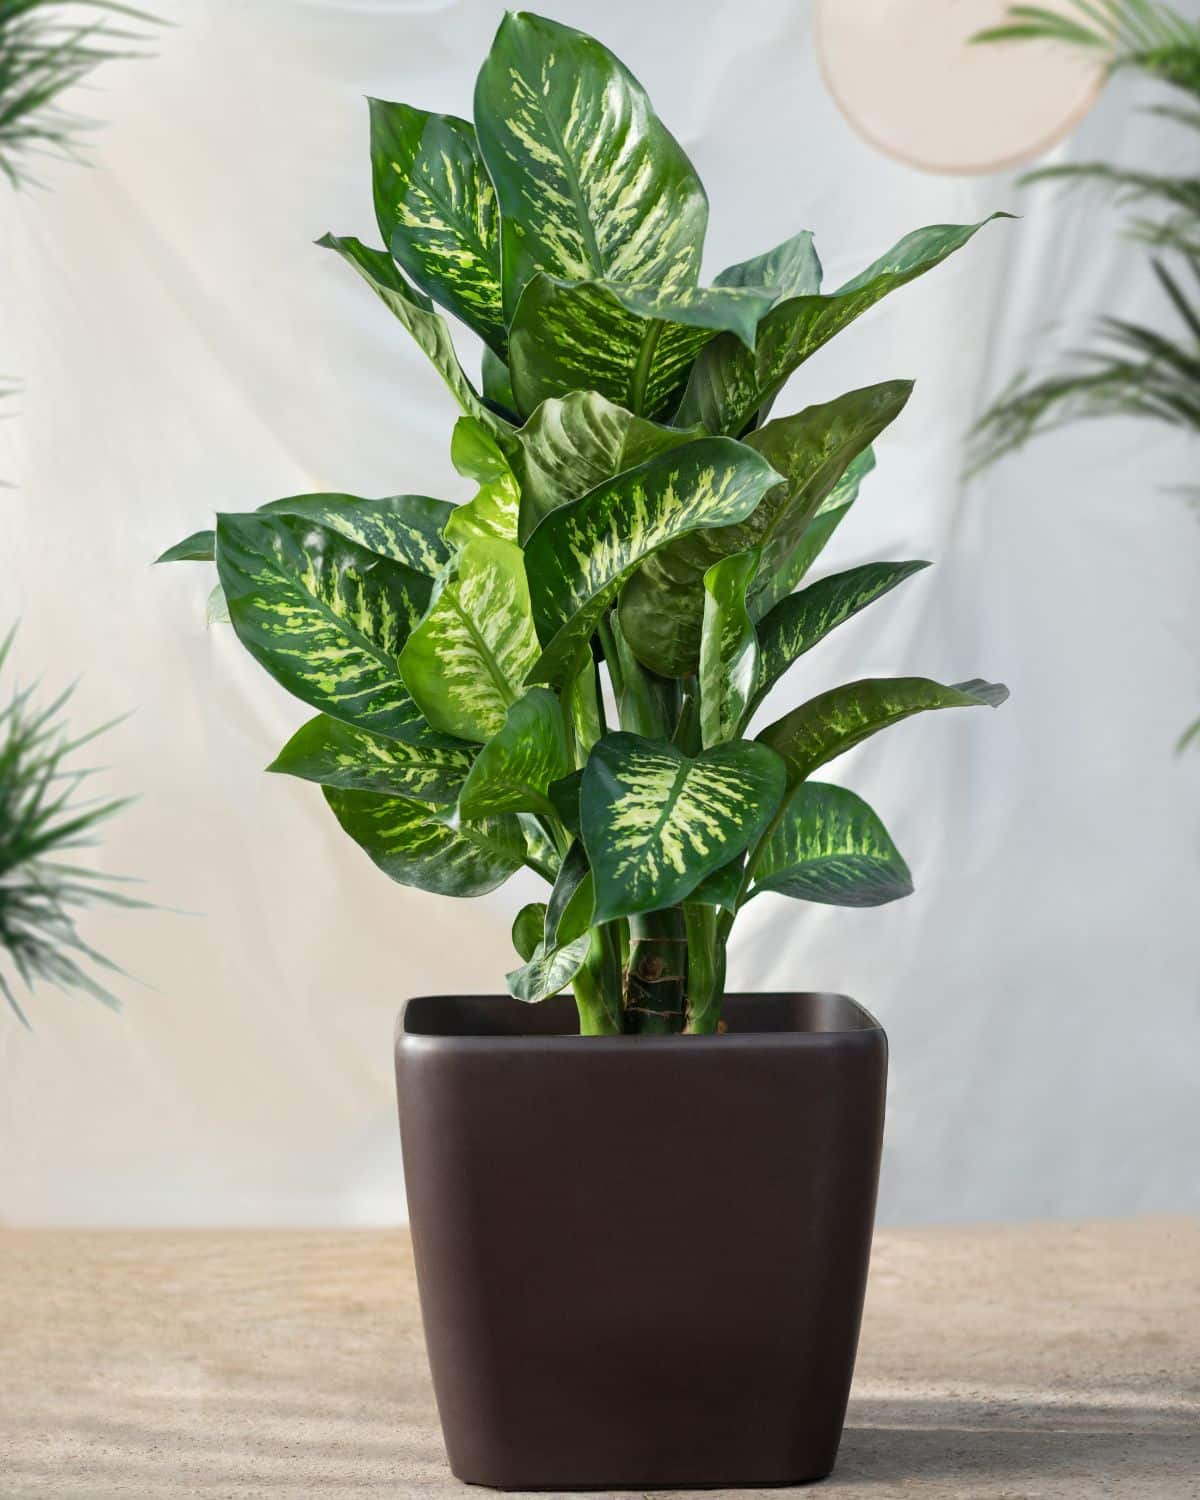 A Dumb Cane plant with beautiful foliage in a black pot.